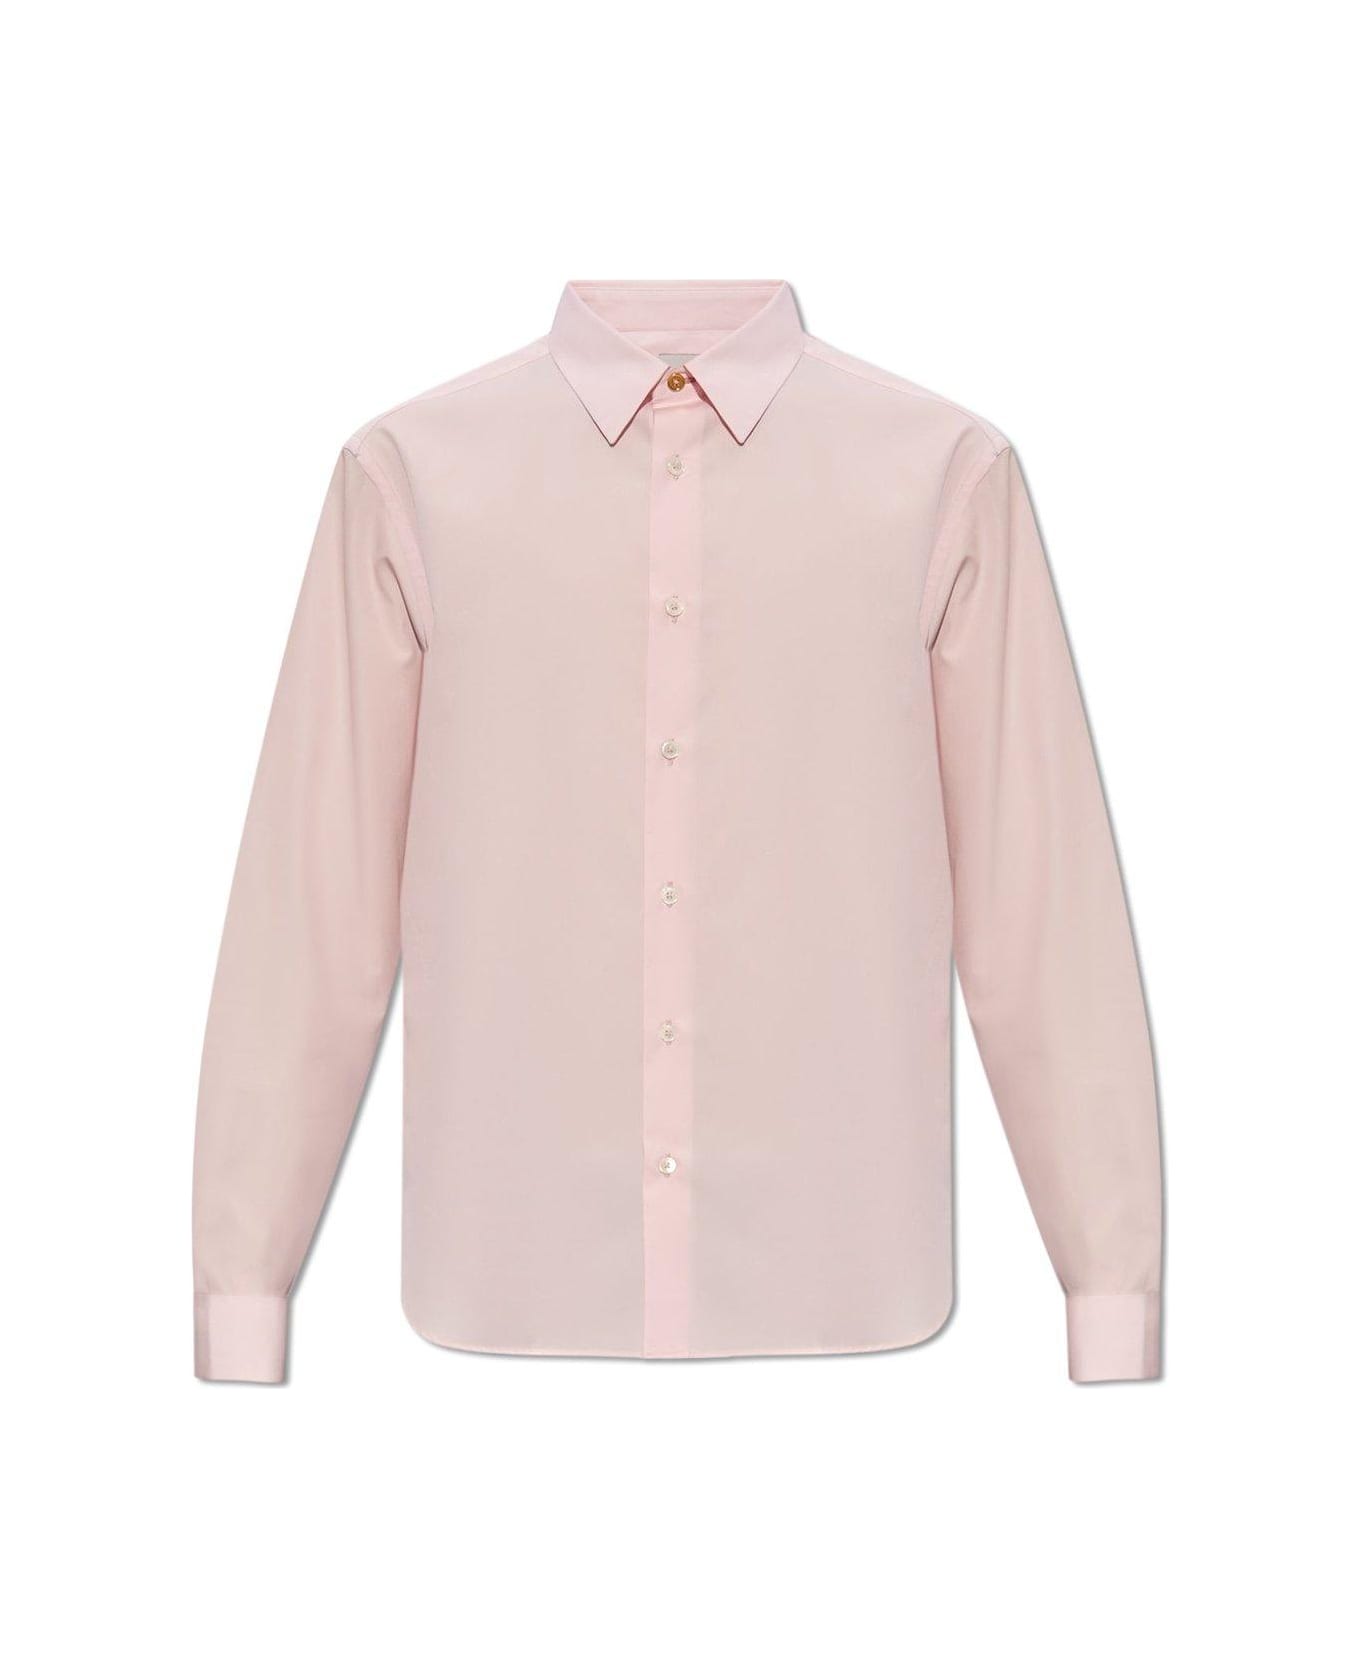 PS by Paul Smith Tailored Shirt Shirt - POWDER PINK シャツ